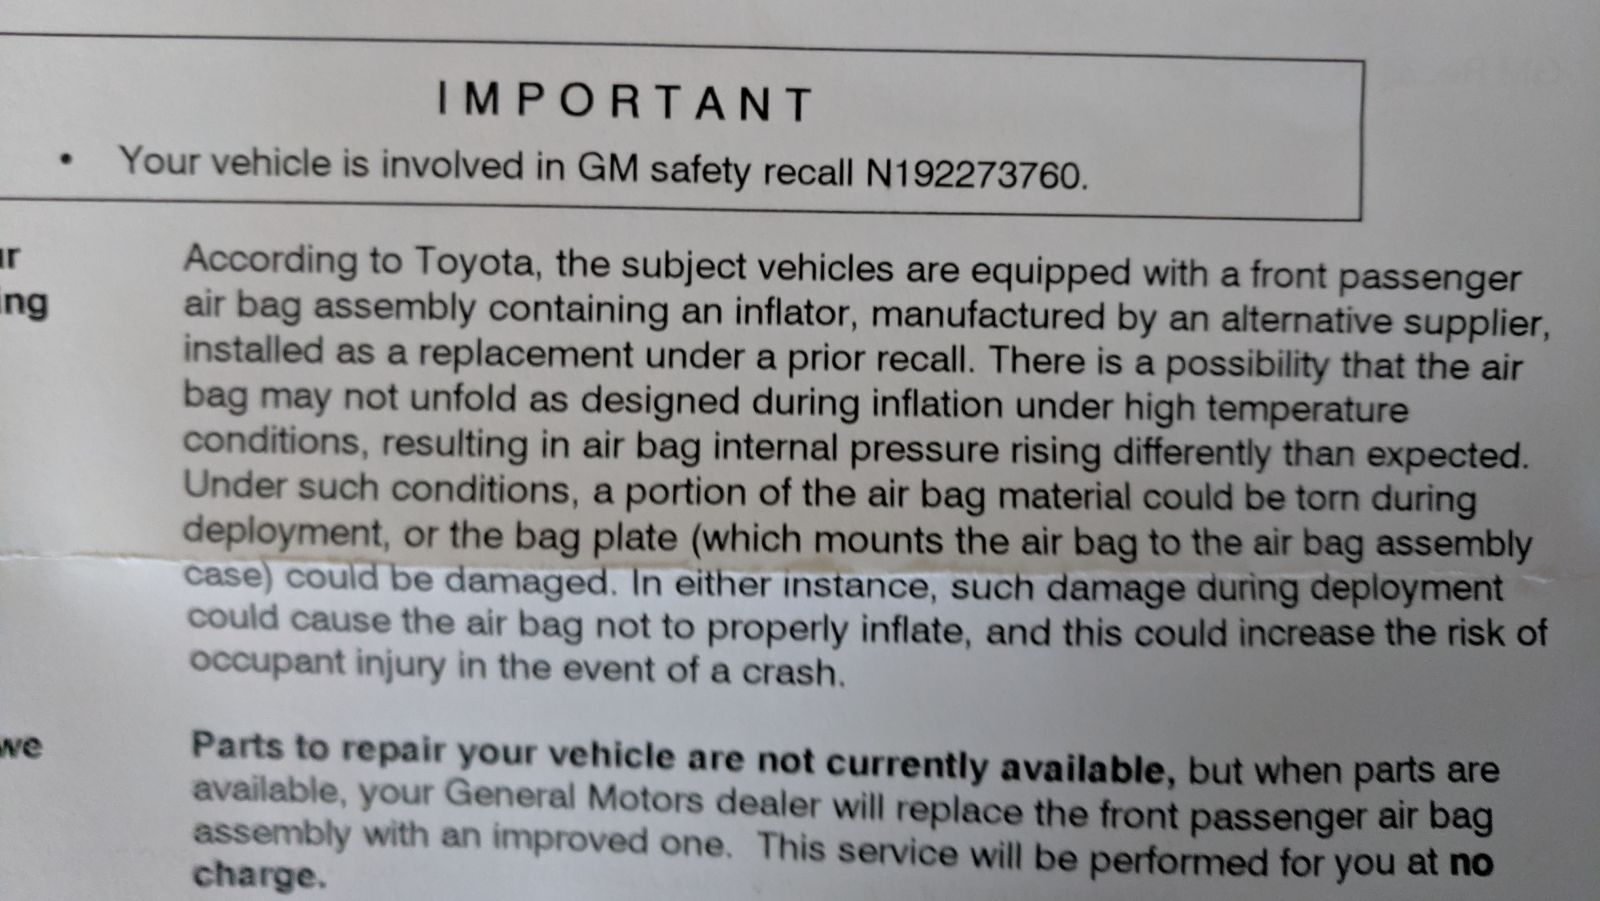 Illustration for article titled My recalled airbag is being recalled.